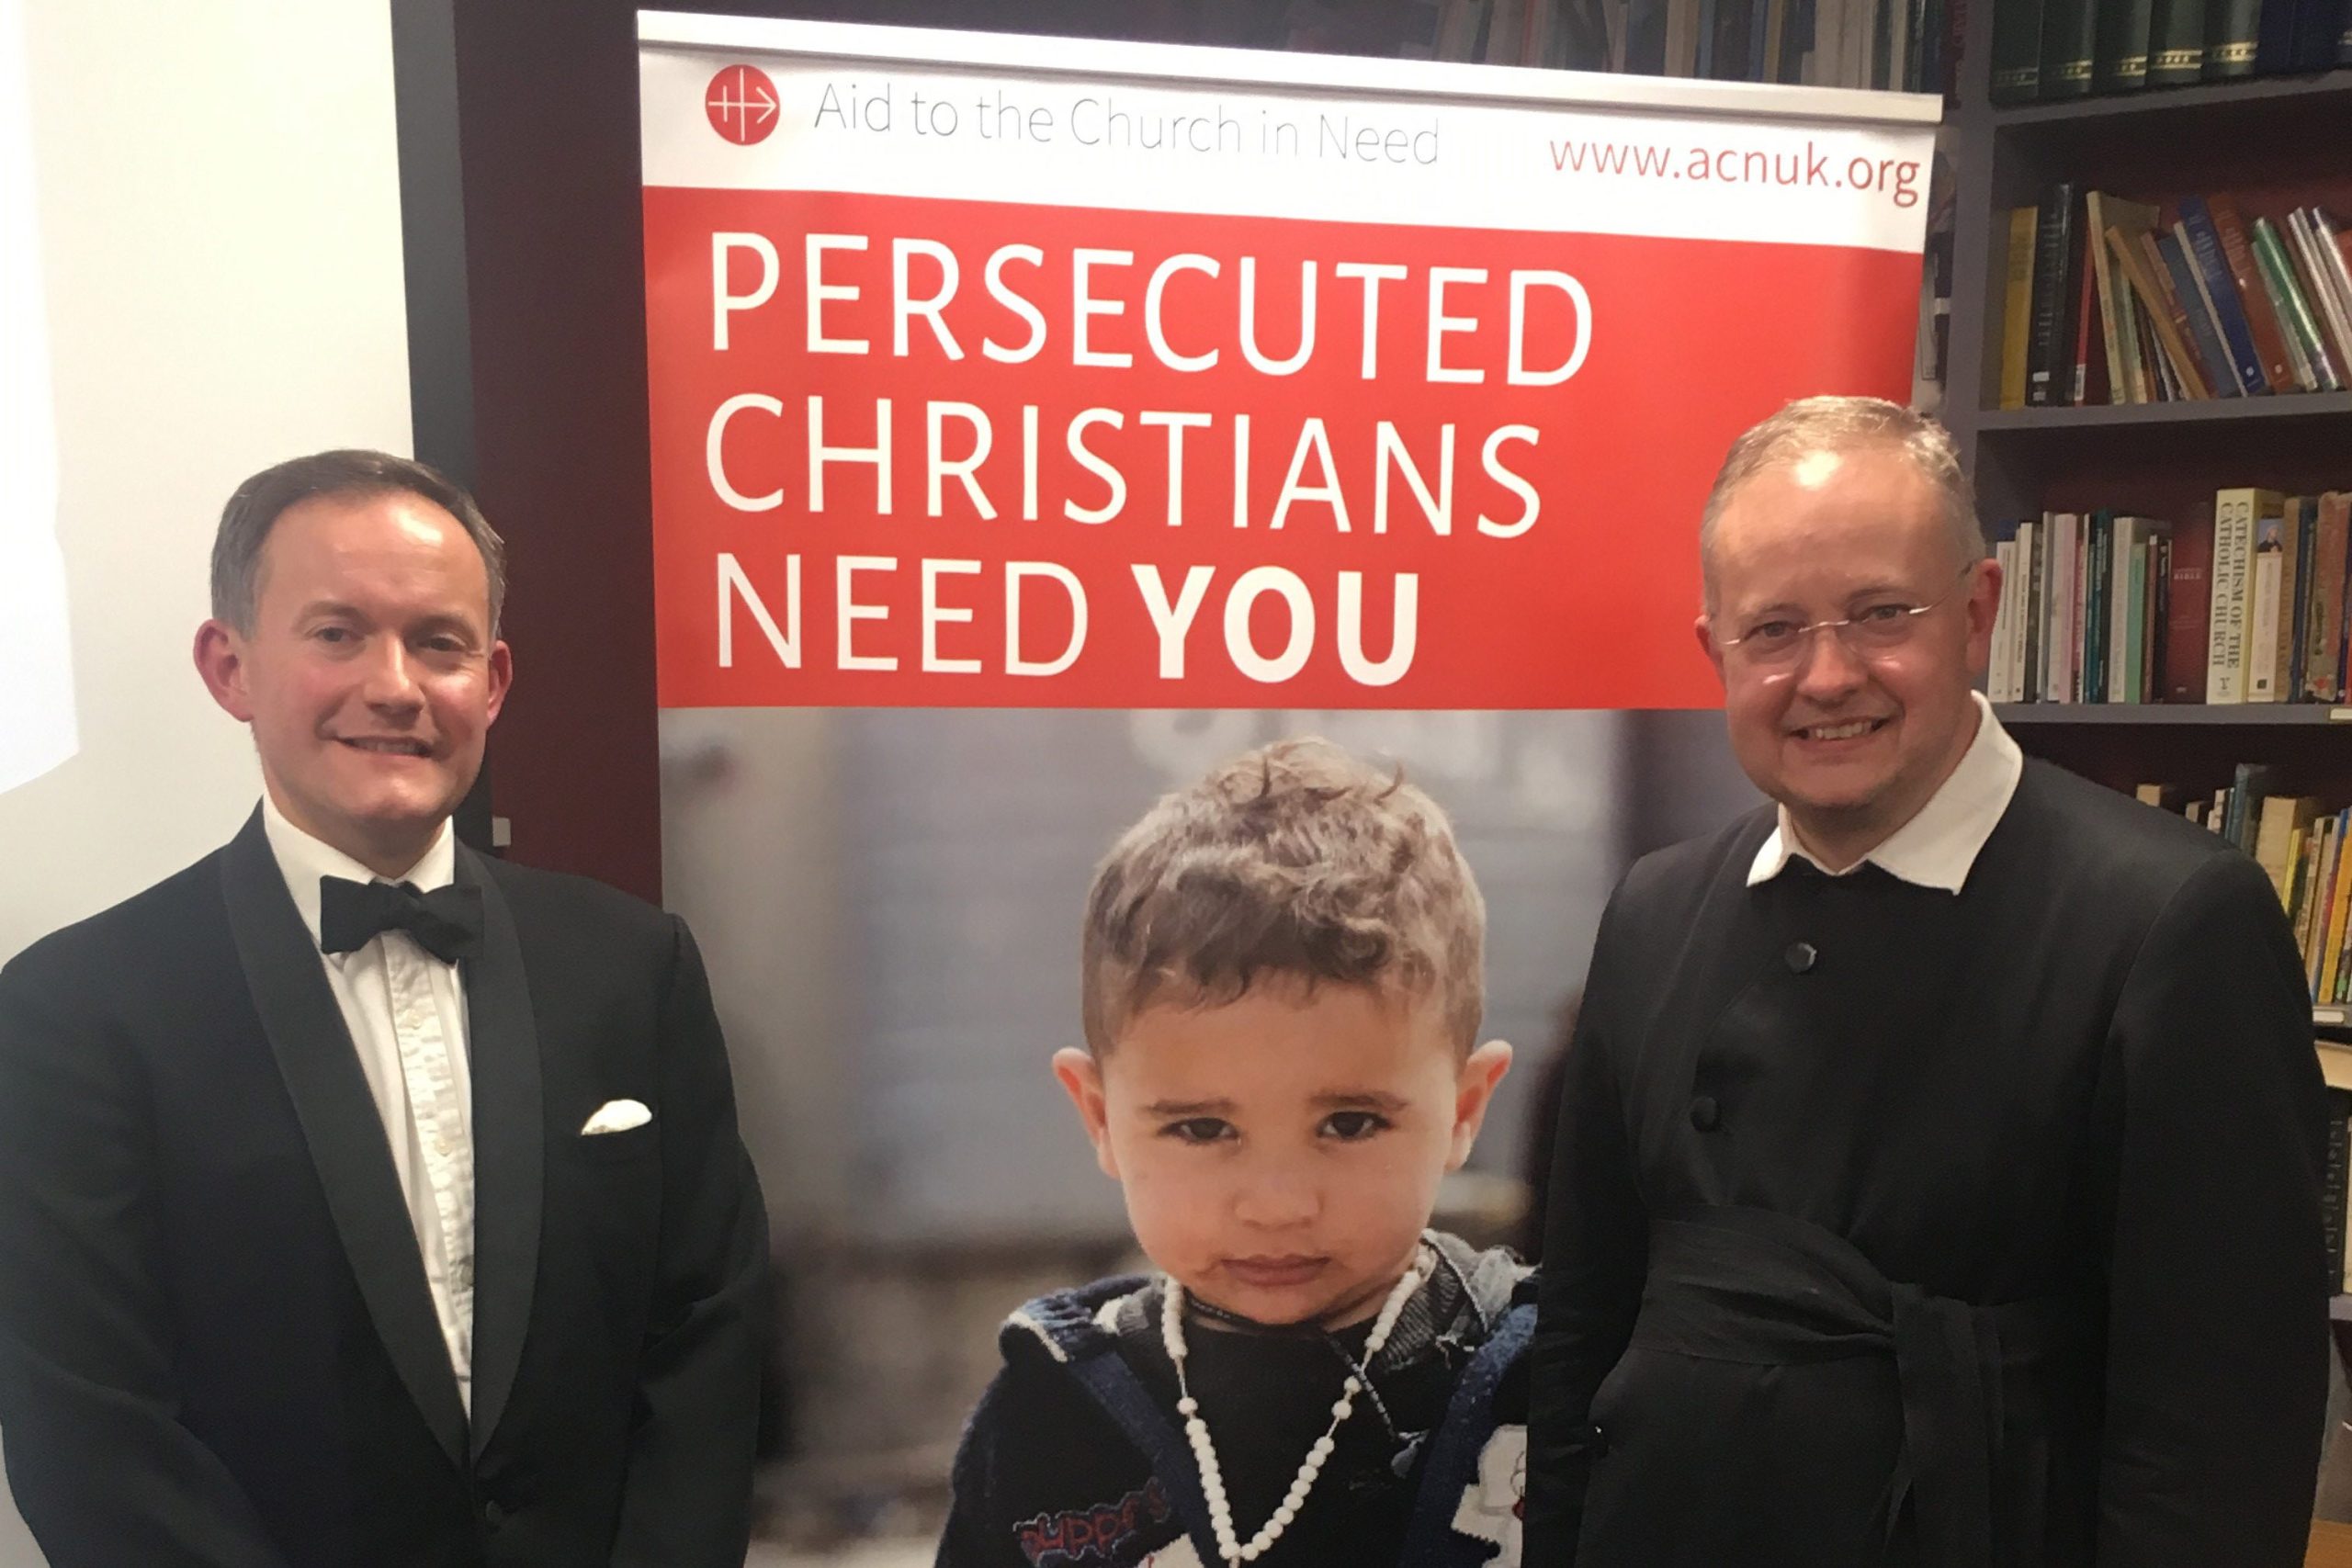 ACN UK Head of Press & Information John Pontifex and the Very Rev Dr Sebastian Jones, Moderator of the Cardiff Oratory in Formation (© Aid to the Church in Need)